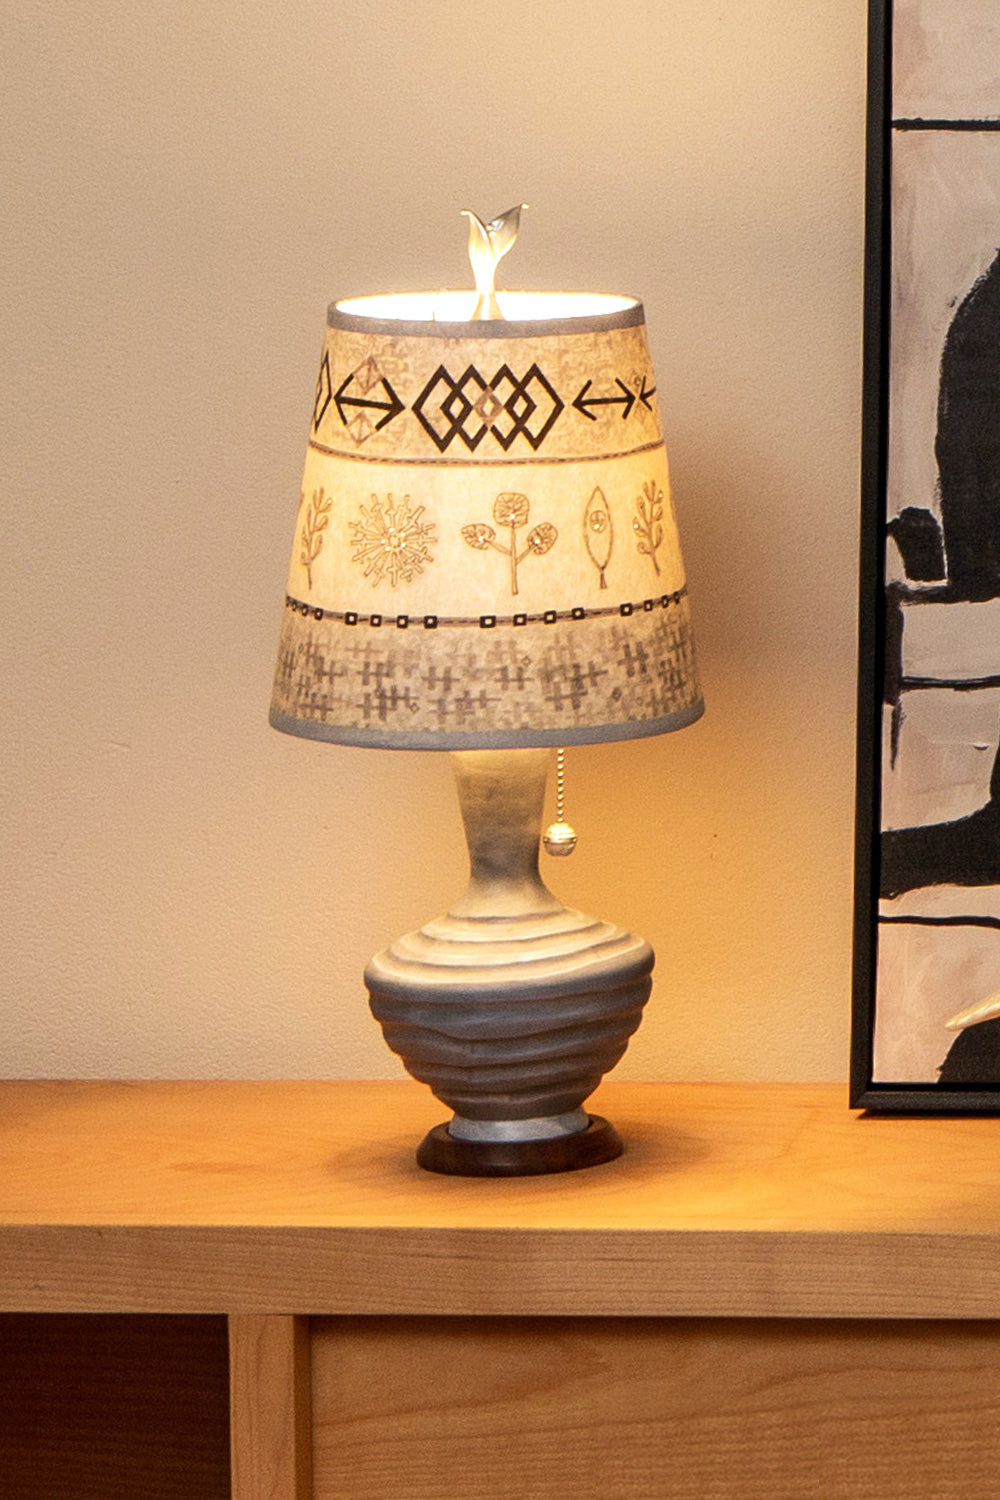 Janna Ugone &amp; Co Table Lamps Ceramic Table Lamp with Small Drum Shade in Woven &amp; Sprig in Mist